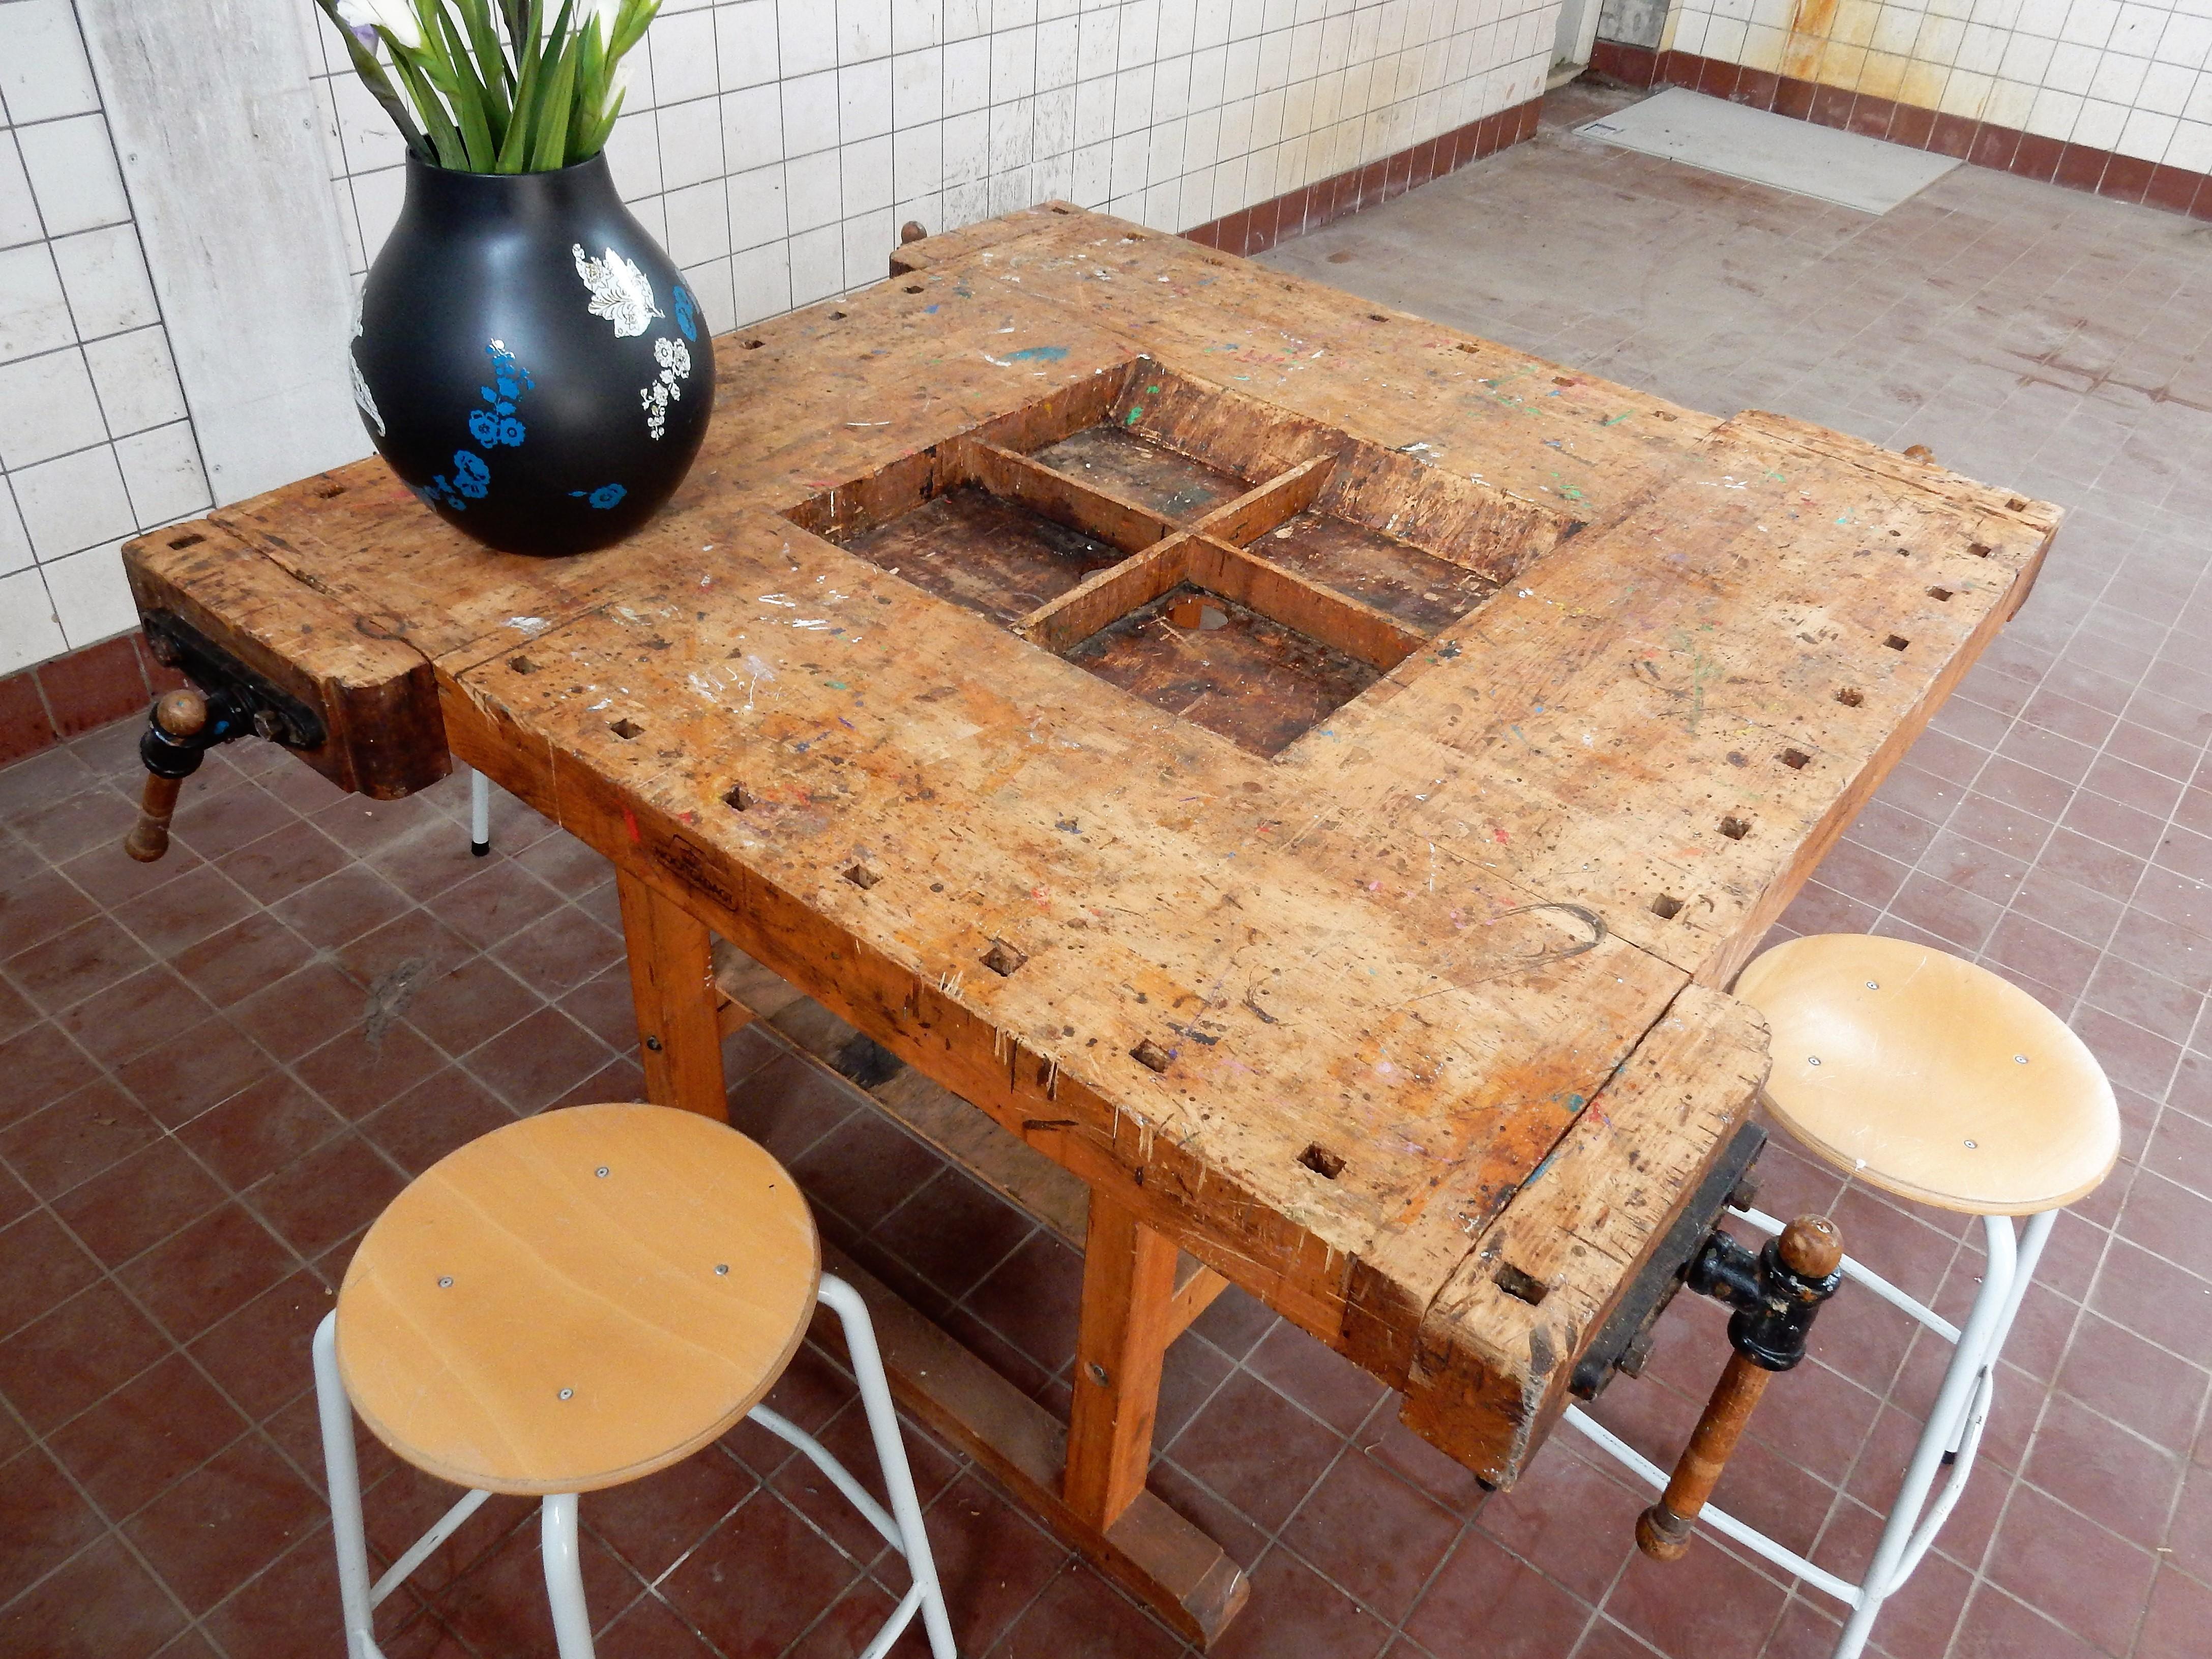 Mid-Century Modern Vintage Industrial 4-Sided Workbench/Table by Nooitgedagt.